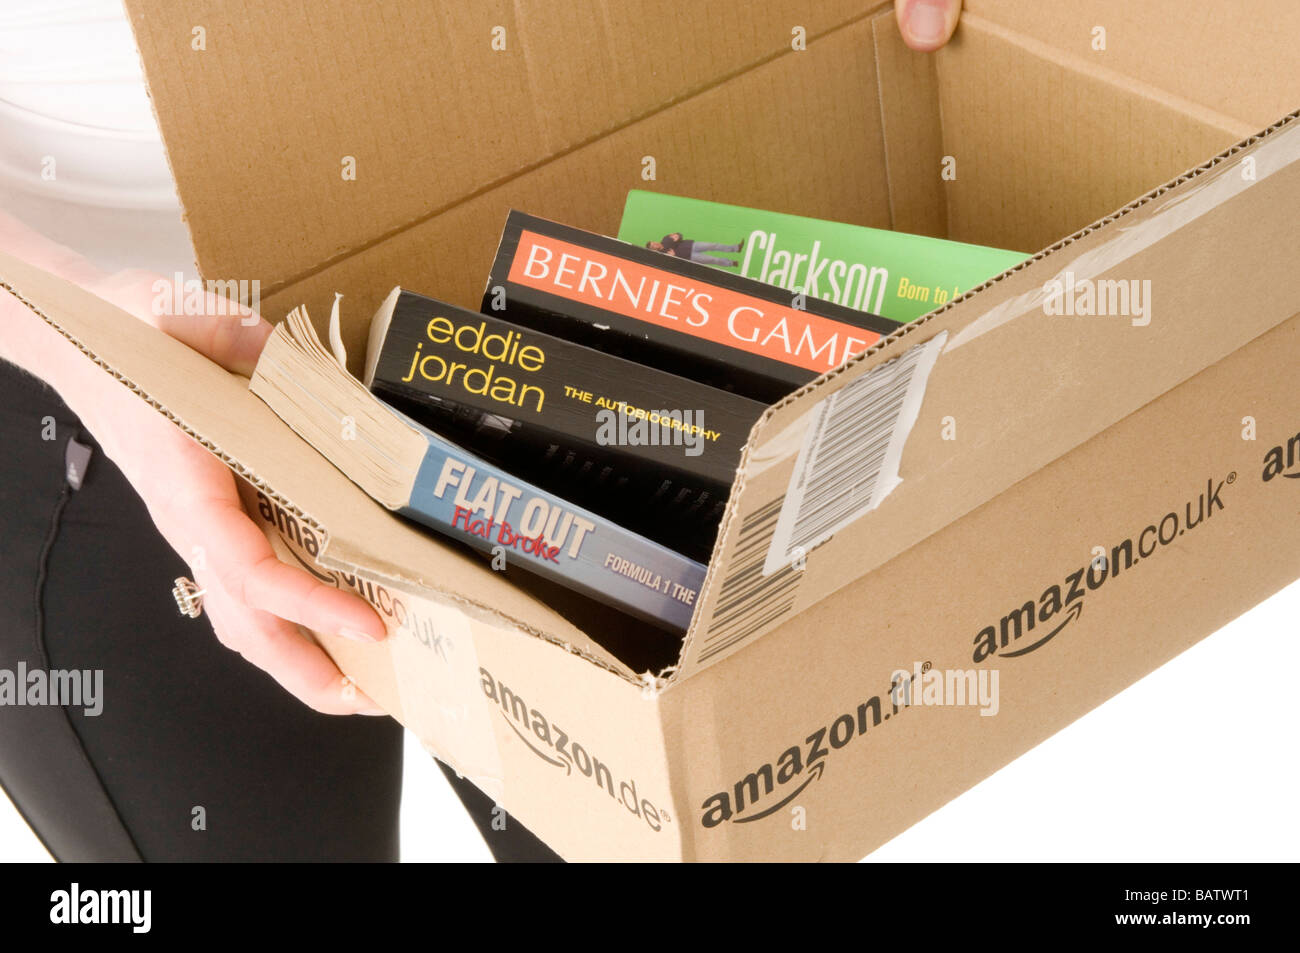 amazon online on line book retailer shop store books bookshop bookstore  mail order shipping box boxes package packages parcel pa Stock Photo - Alamy